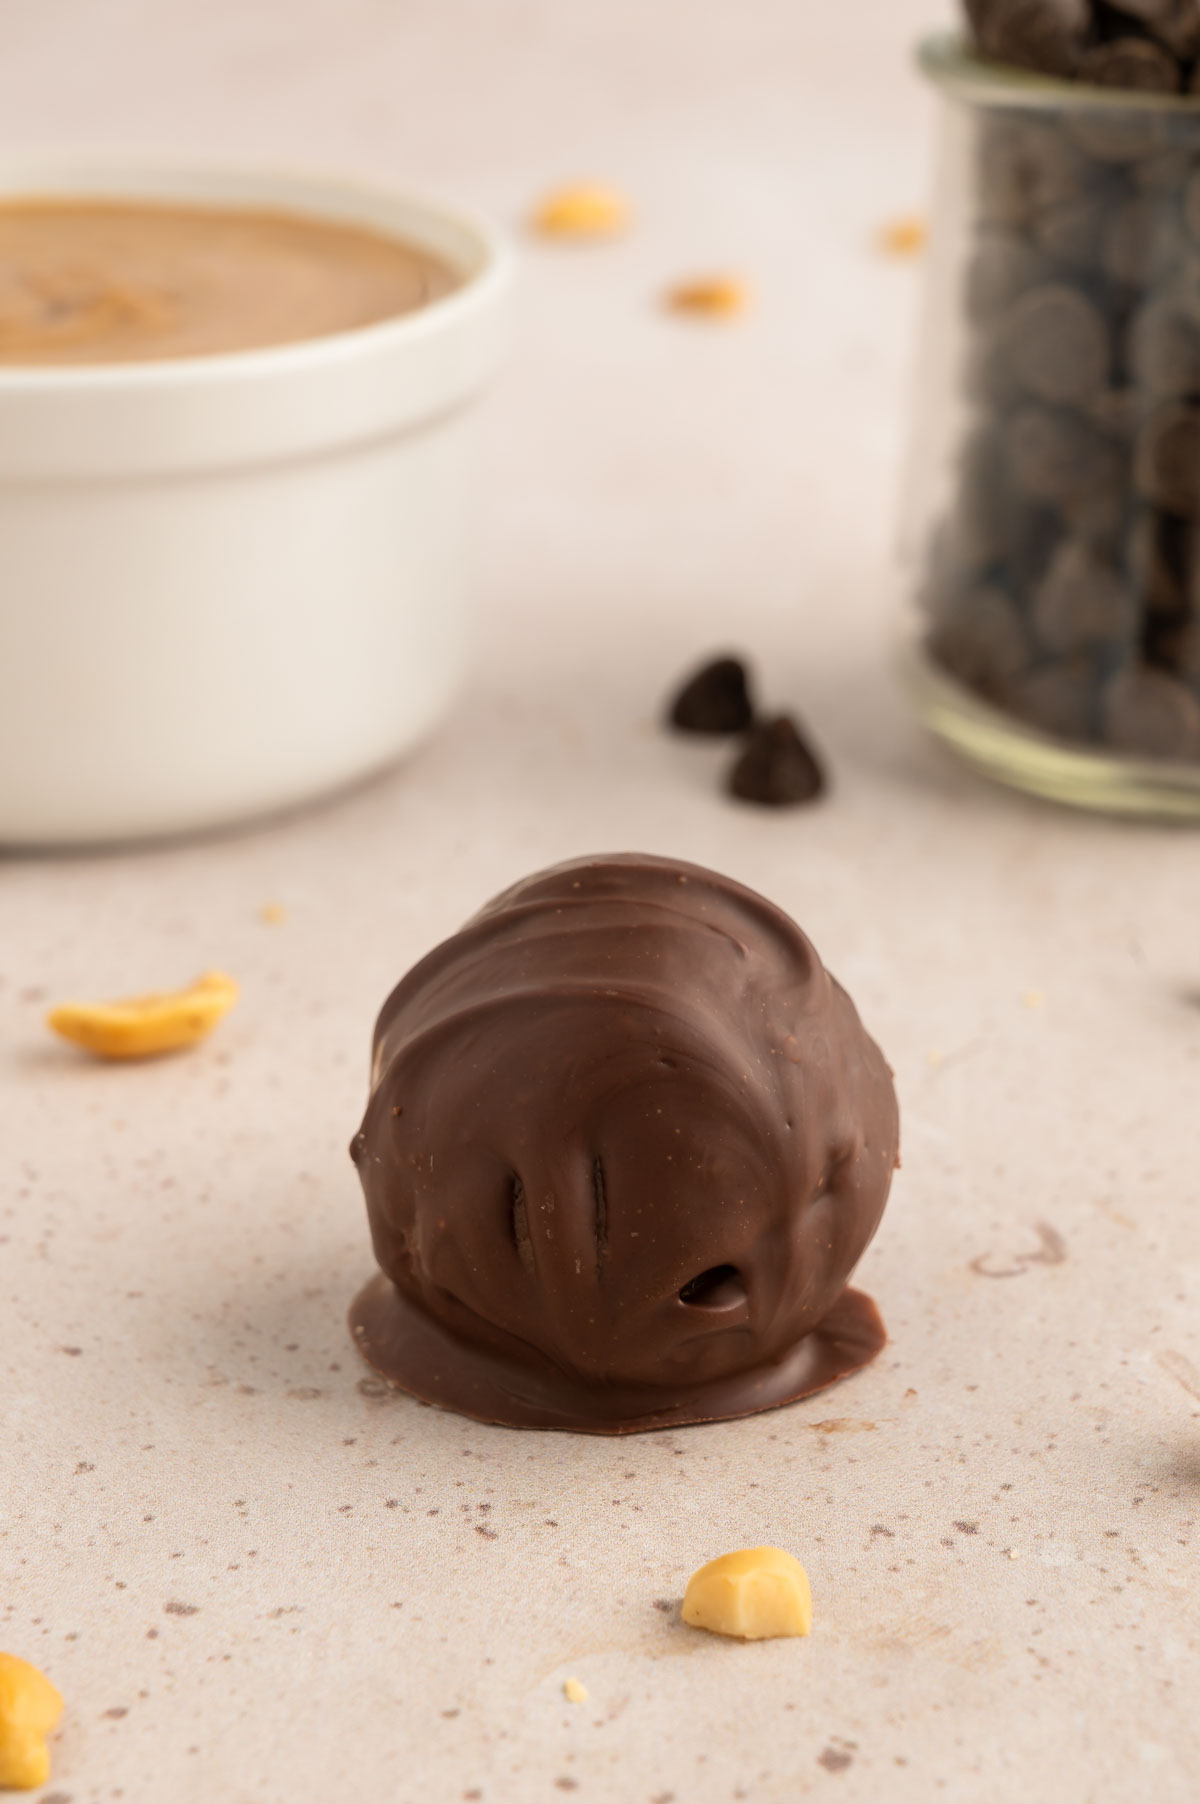 A cookie dough ball that has been dipped in chocolate.